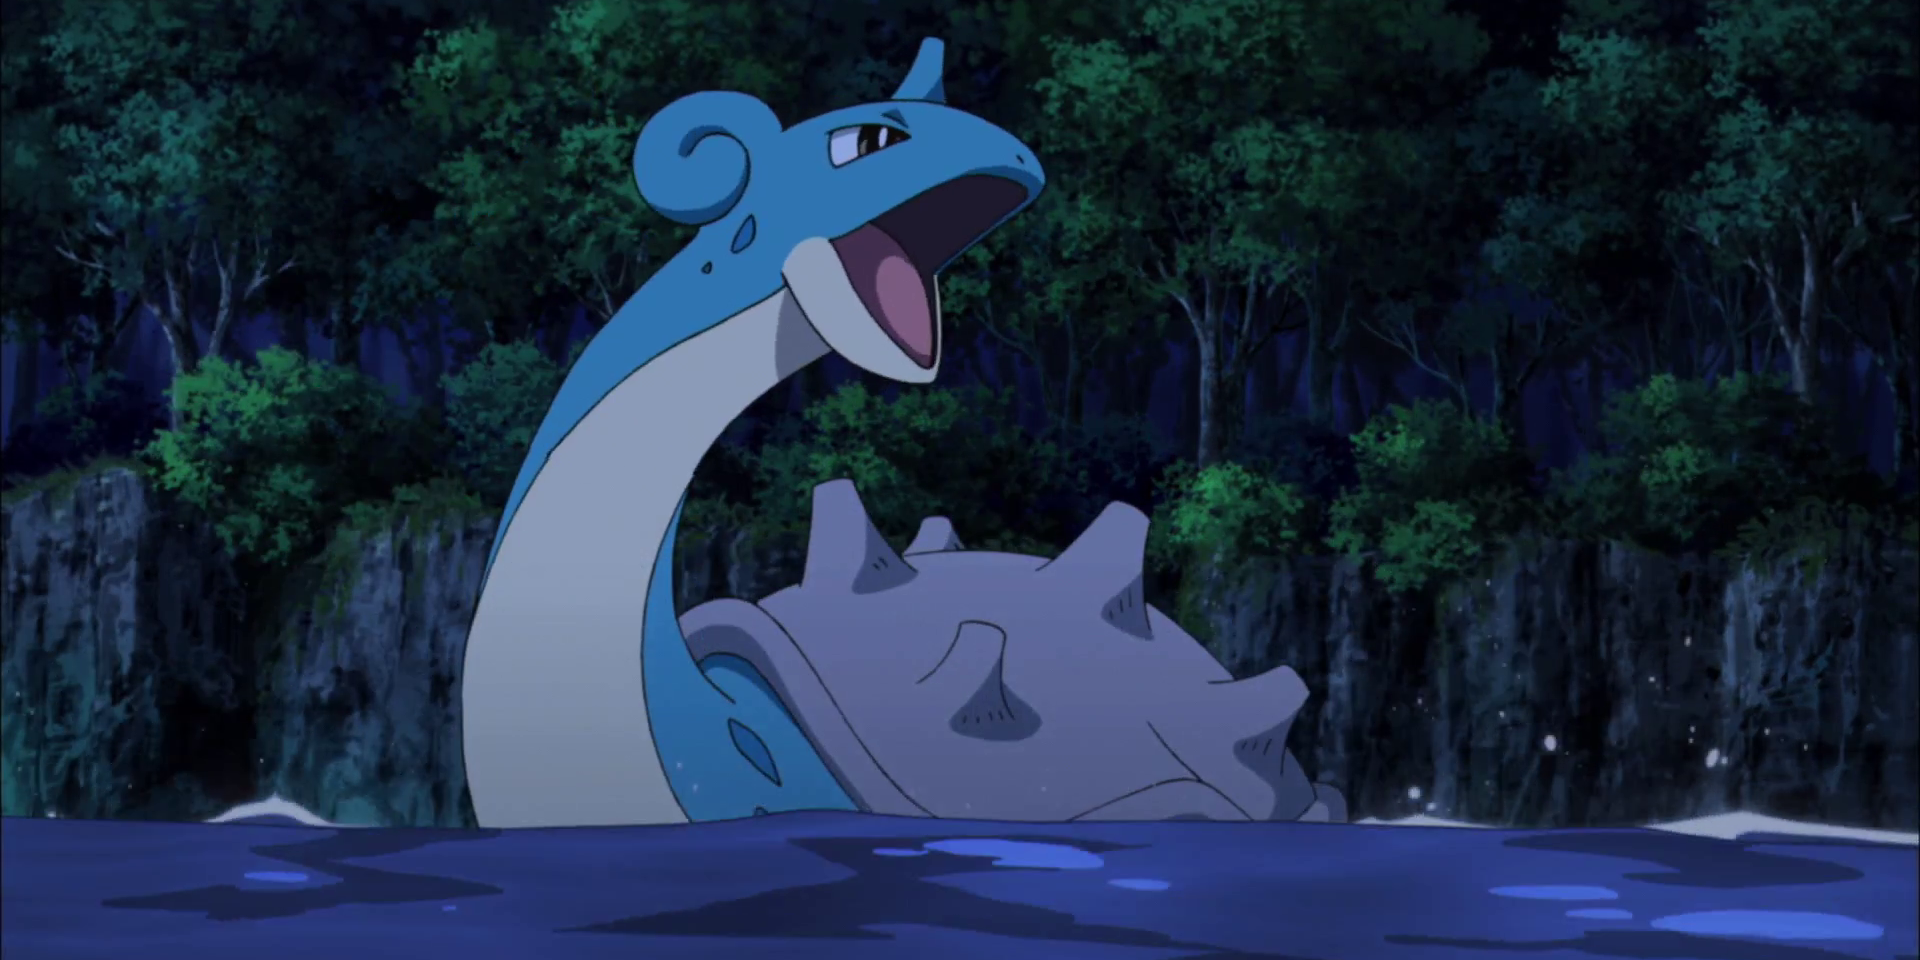 Lapras on the water roaring in the Pokémon anime